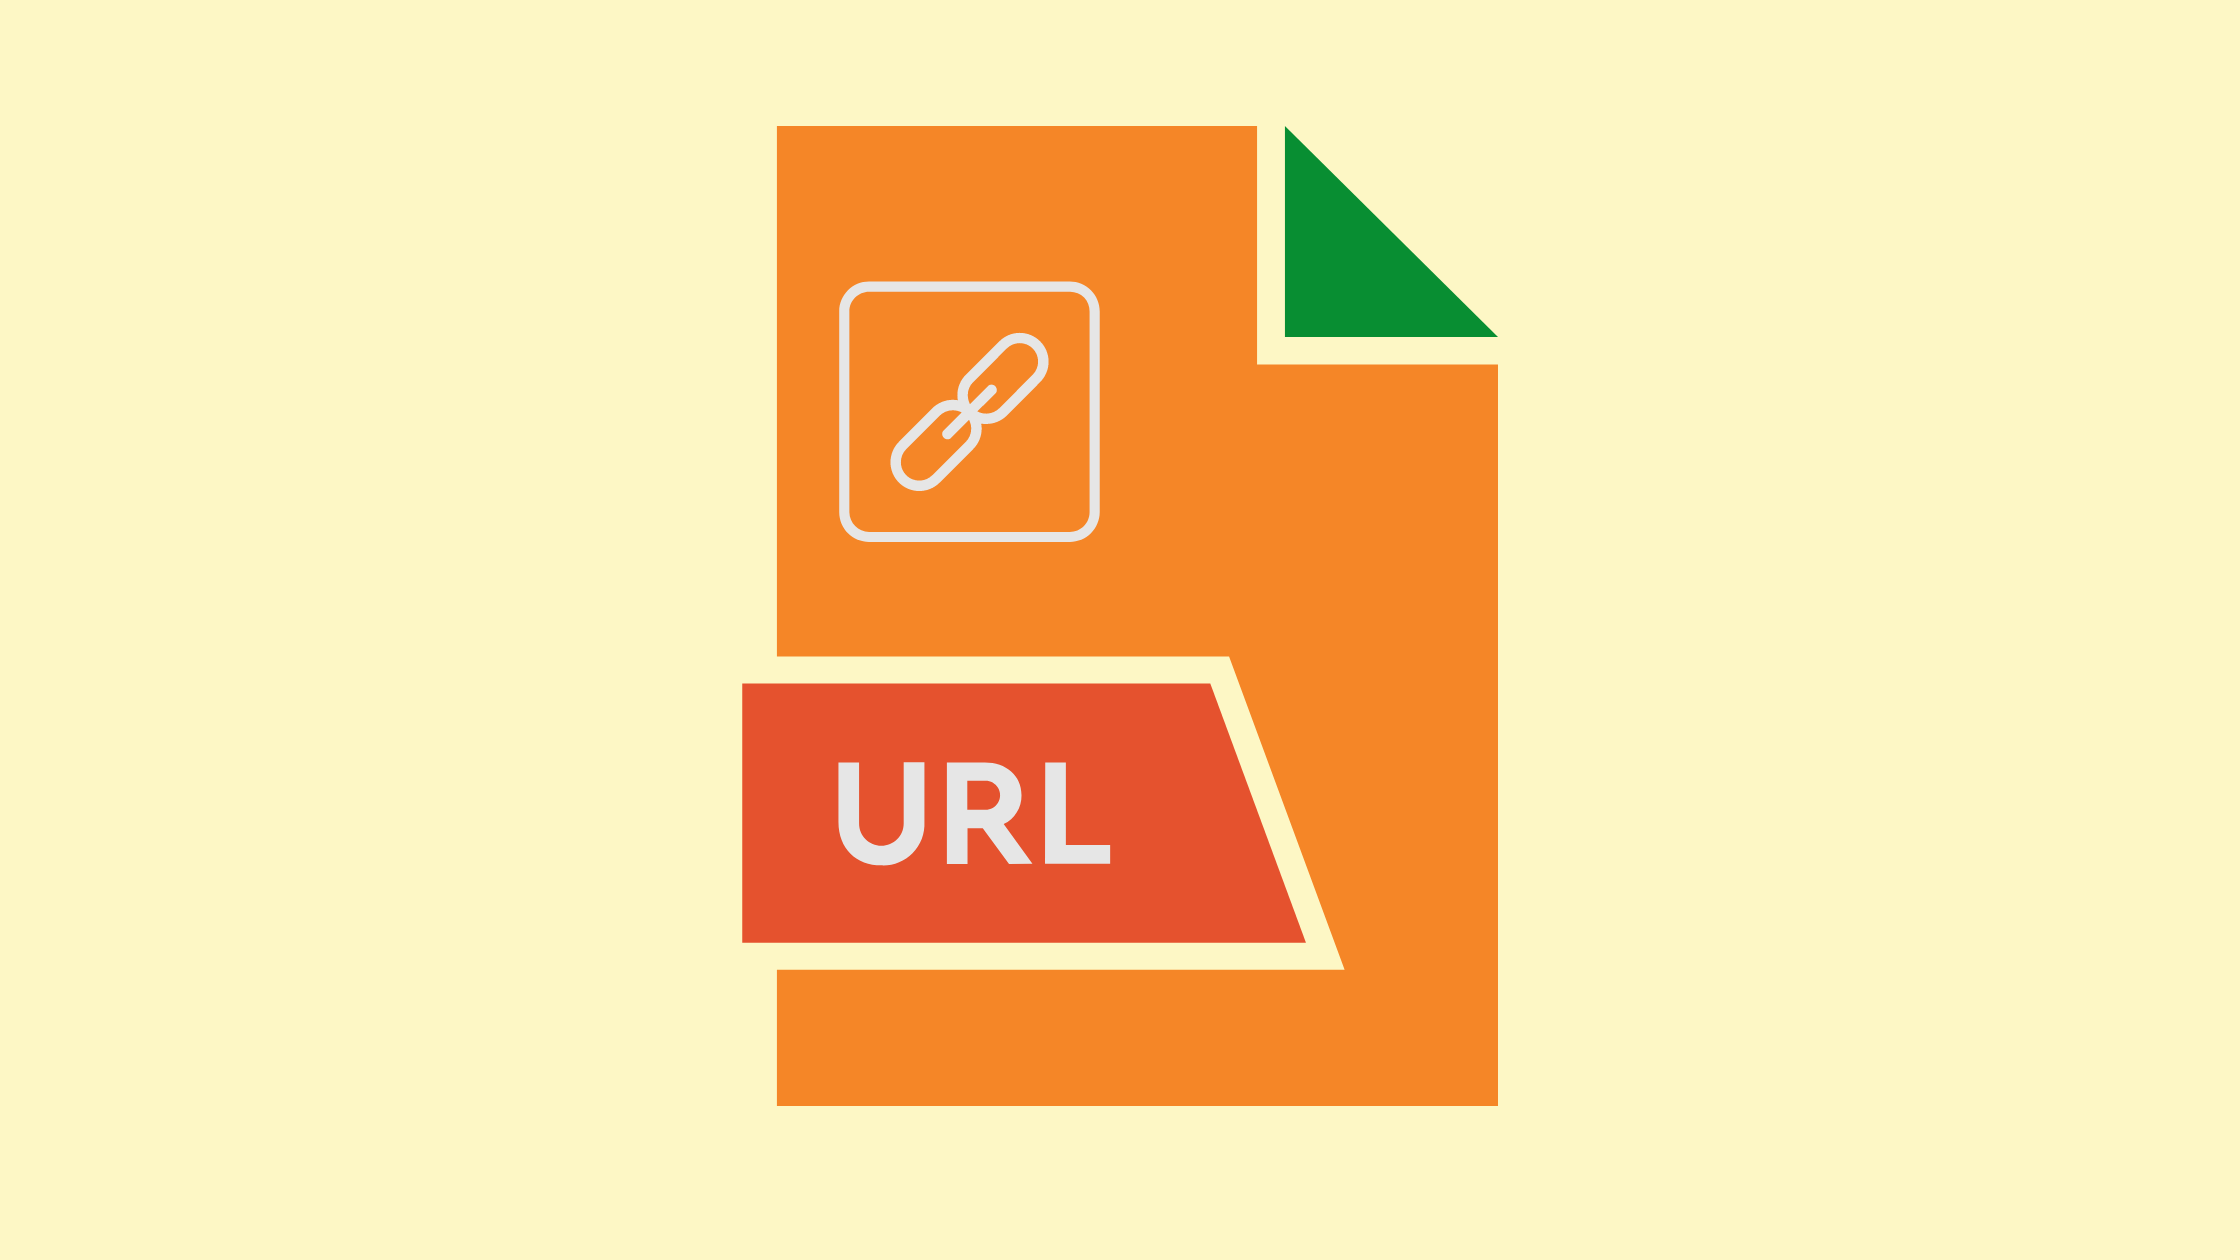 URL Structure shows the hierarchy followed in the content, reflecting the importance of image